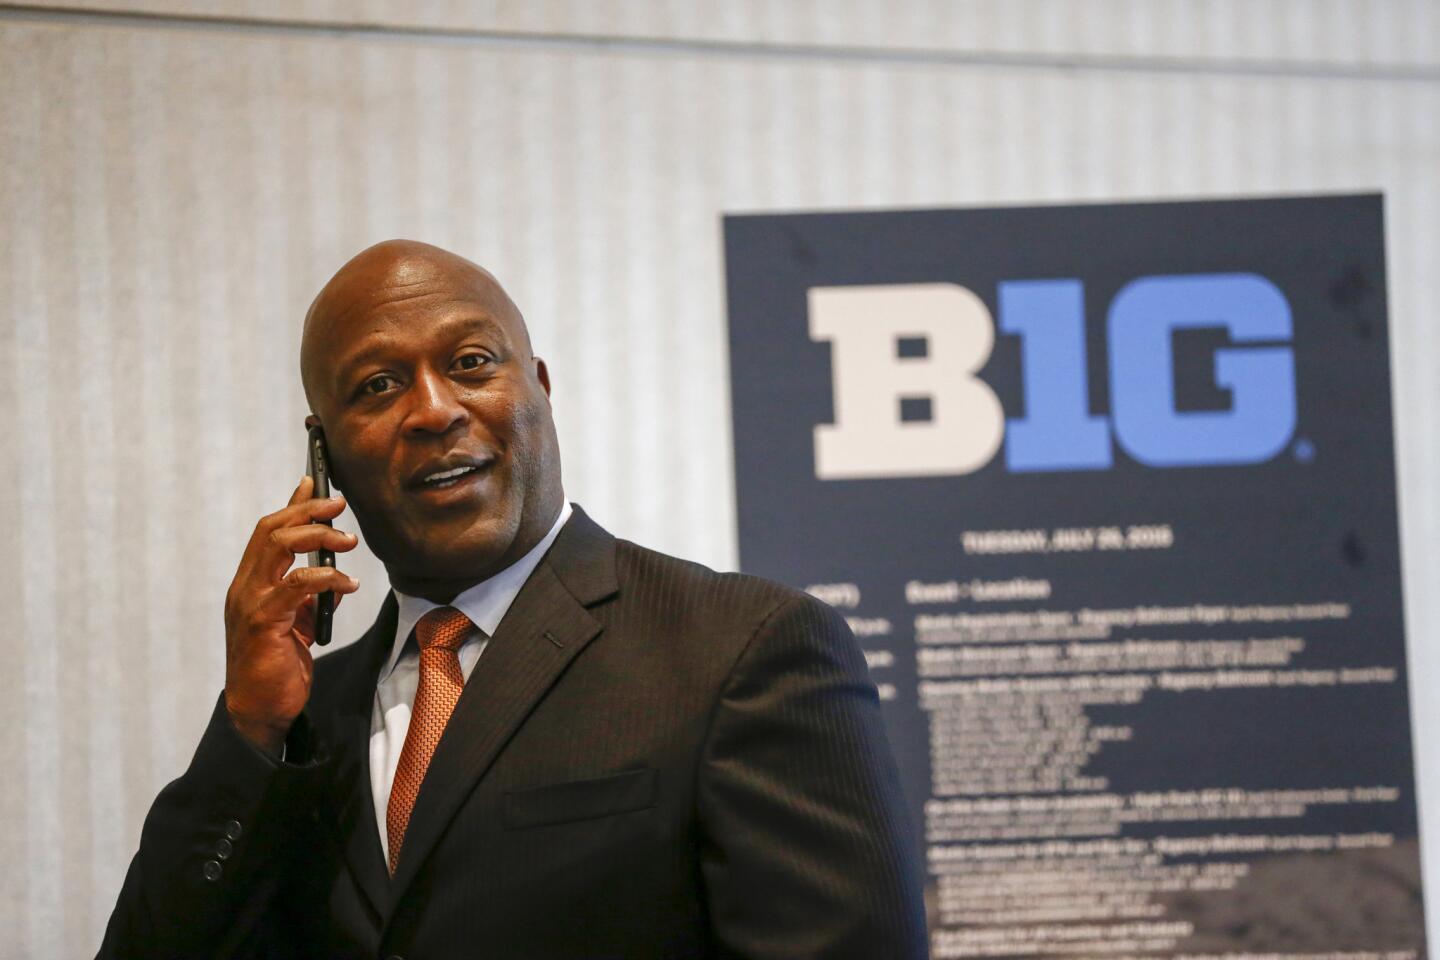 Illinois head coach Lovie Smith chats on the phone prior to taking the stage at the Big Ten football media day held at the Hyatt Regency McCormick Place on July 26, 2016.